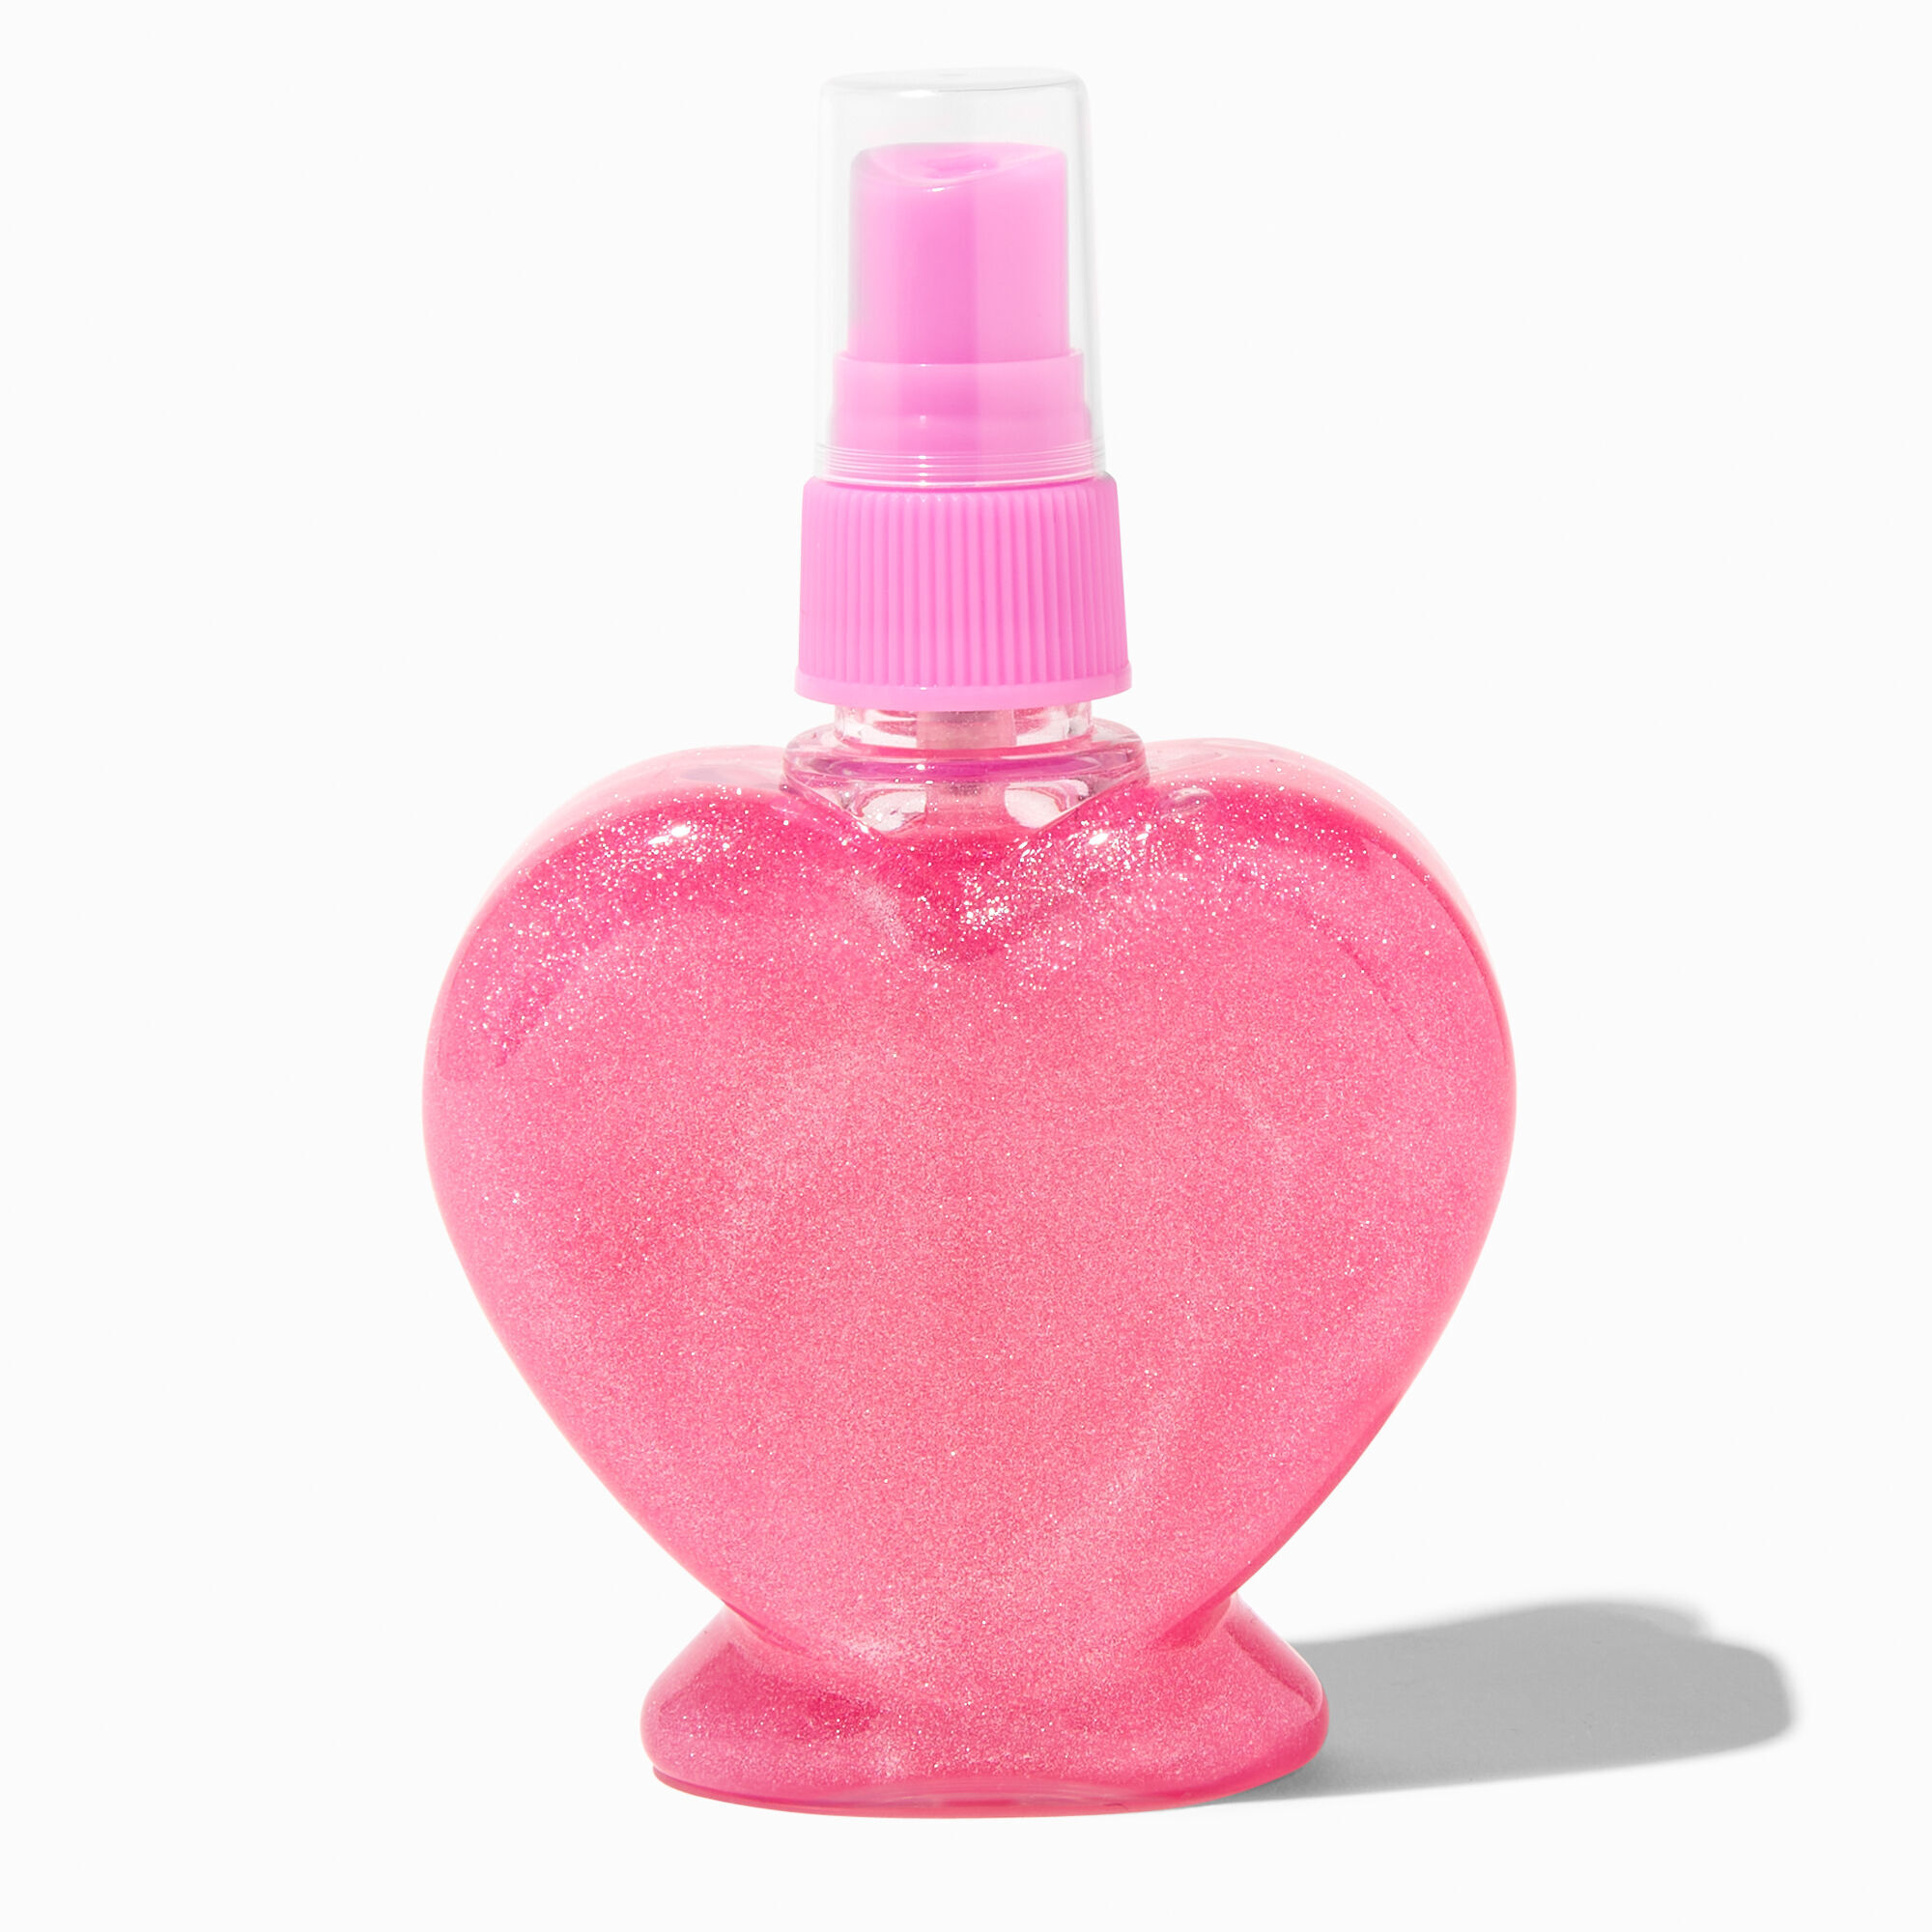 View Claires Club Glitter Heart Body Mist Pink information